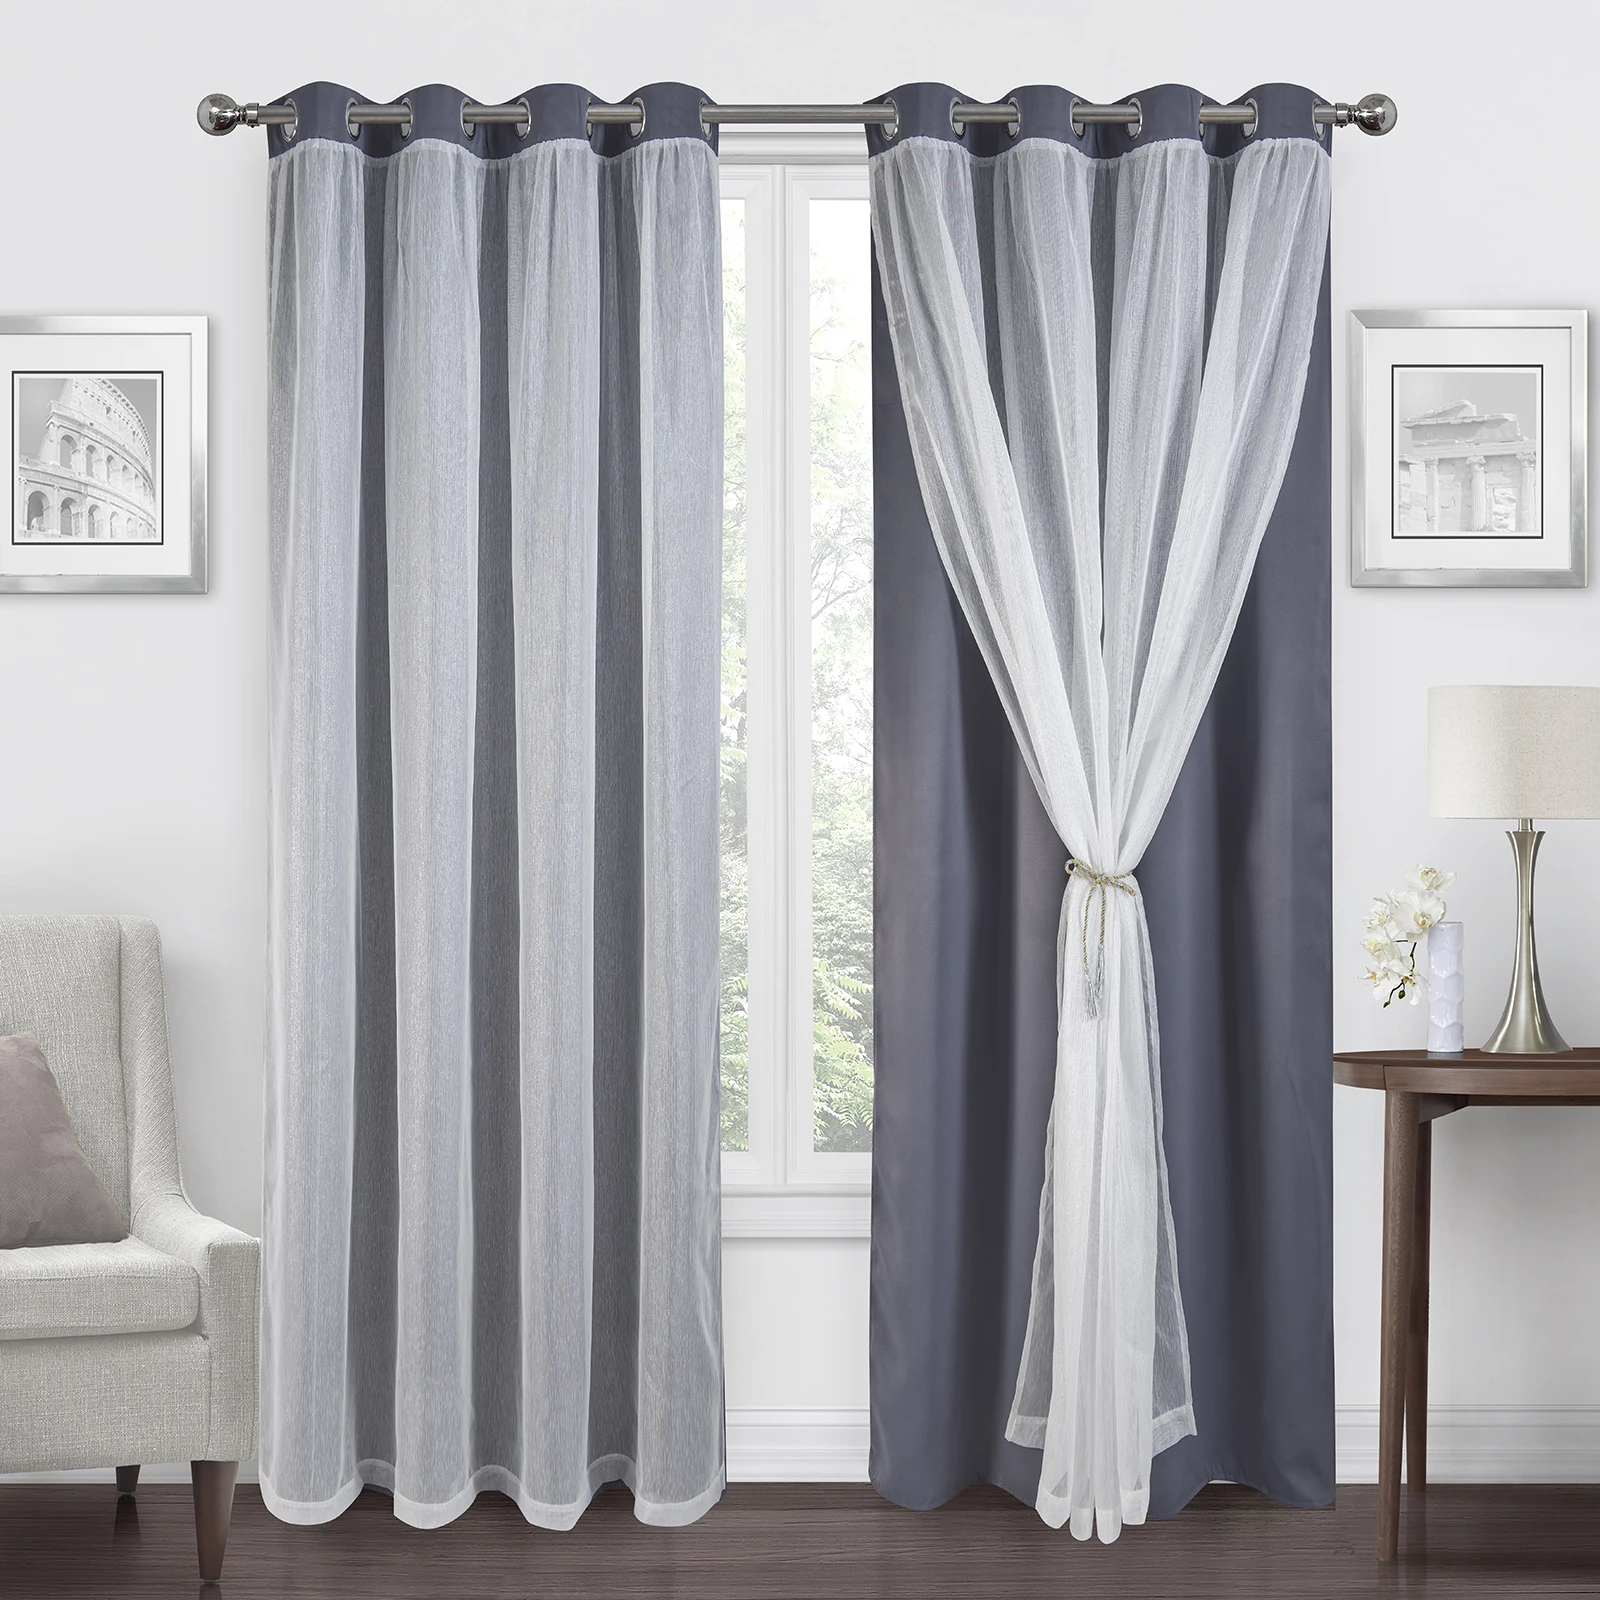 White Sheer Voile and Blackout Curtains Assembled Grommet Mix and Match Curtains for Living Room W52xH84 Inch Set of 2 Panels